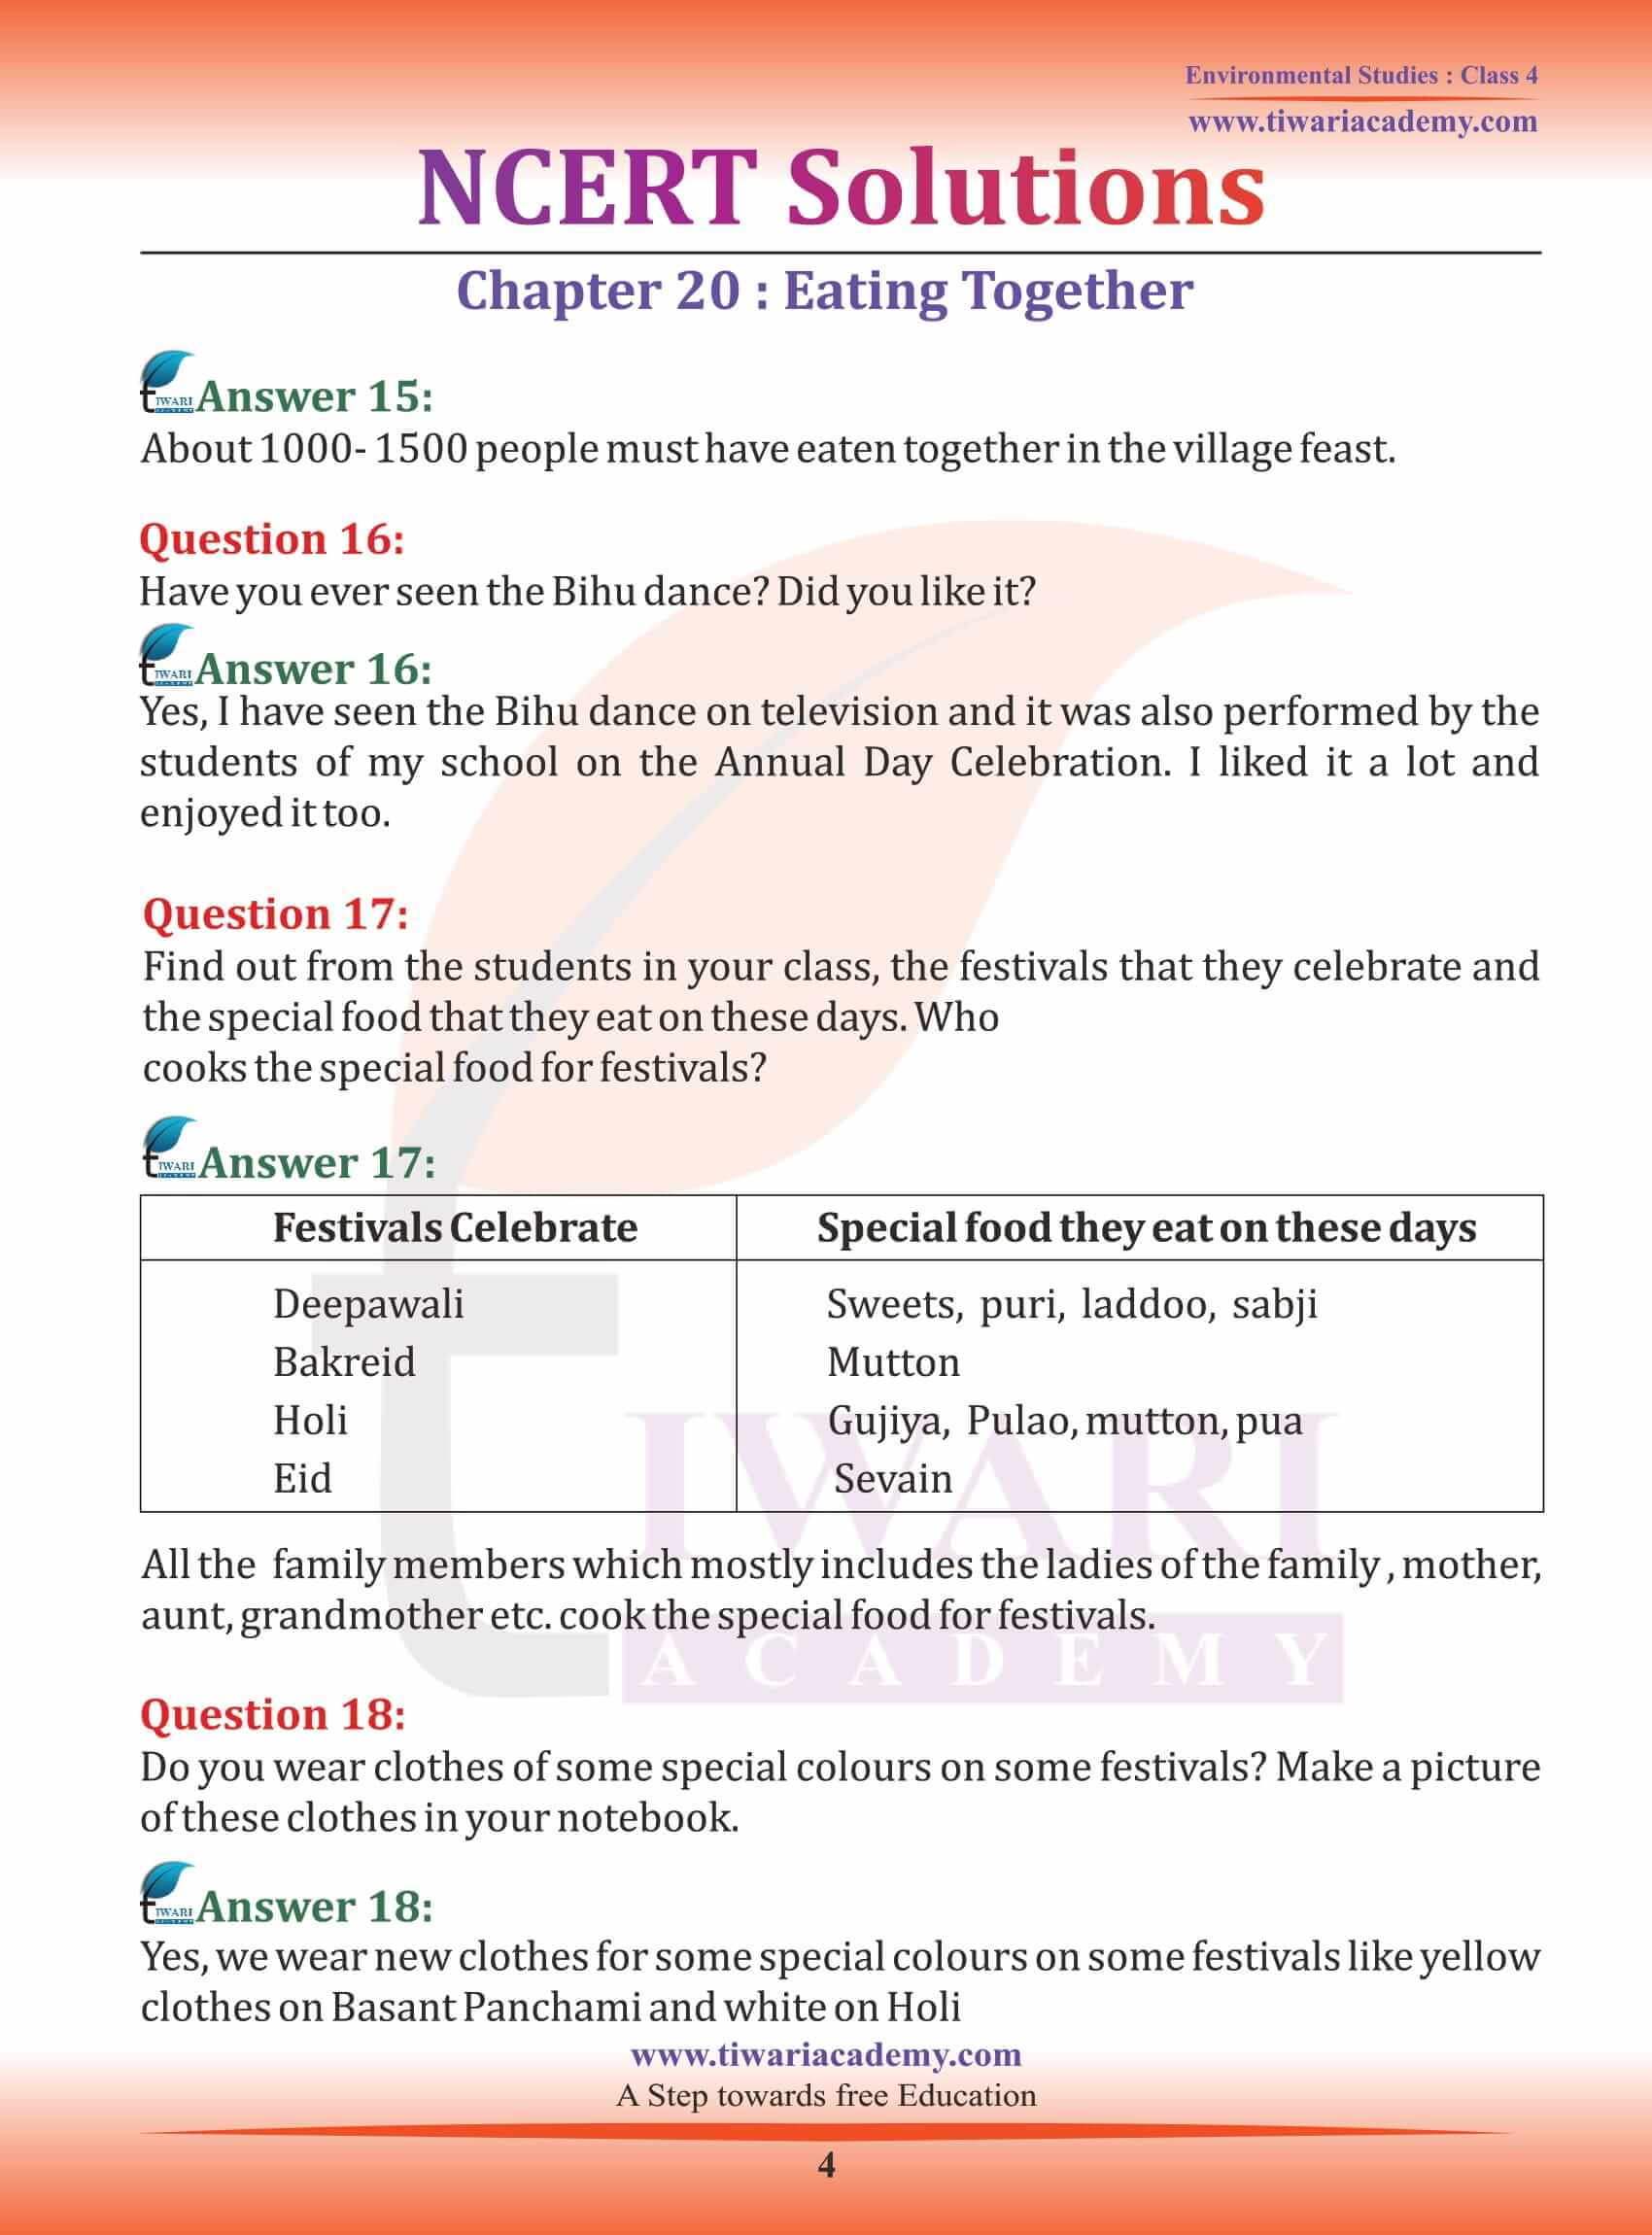 NCERT Solutions for Class 4 EVS Chapter 20 question answers